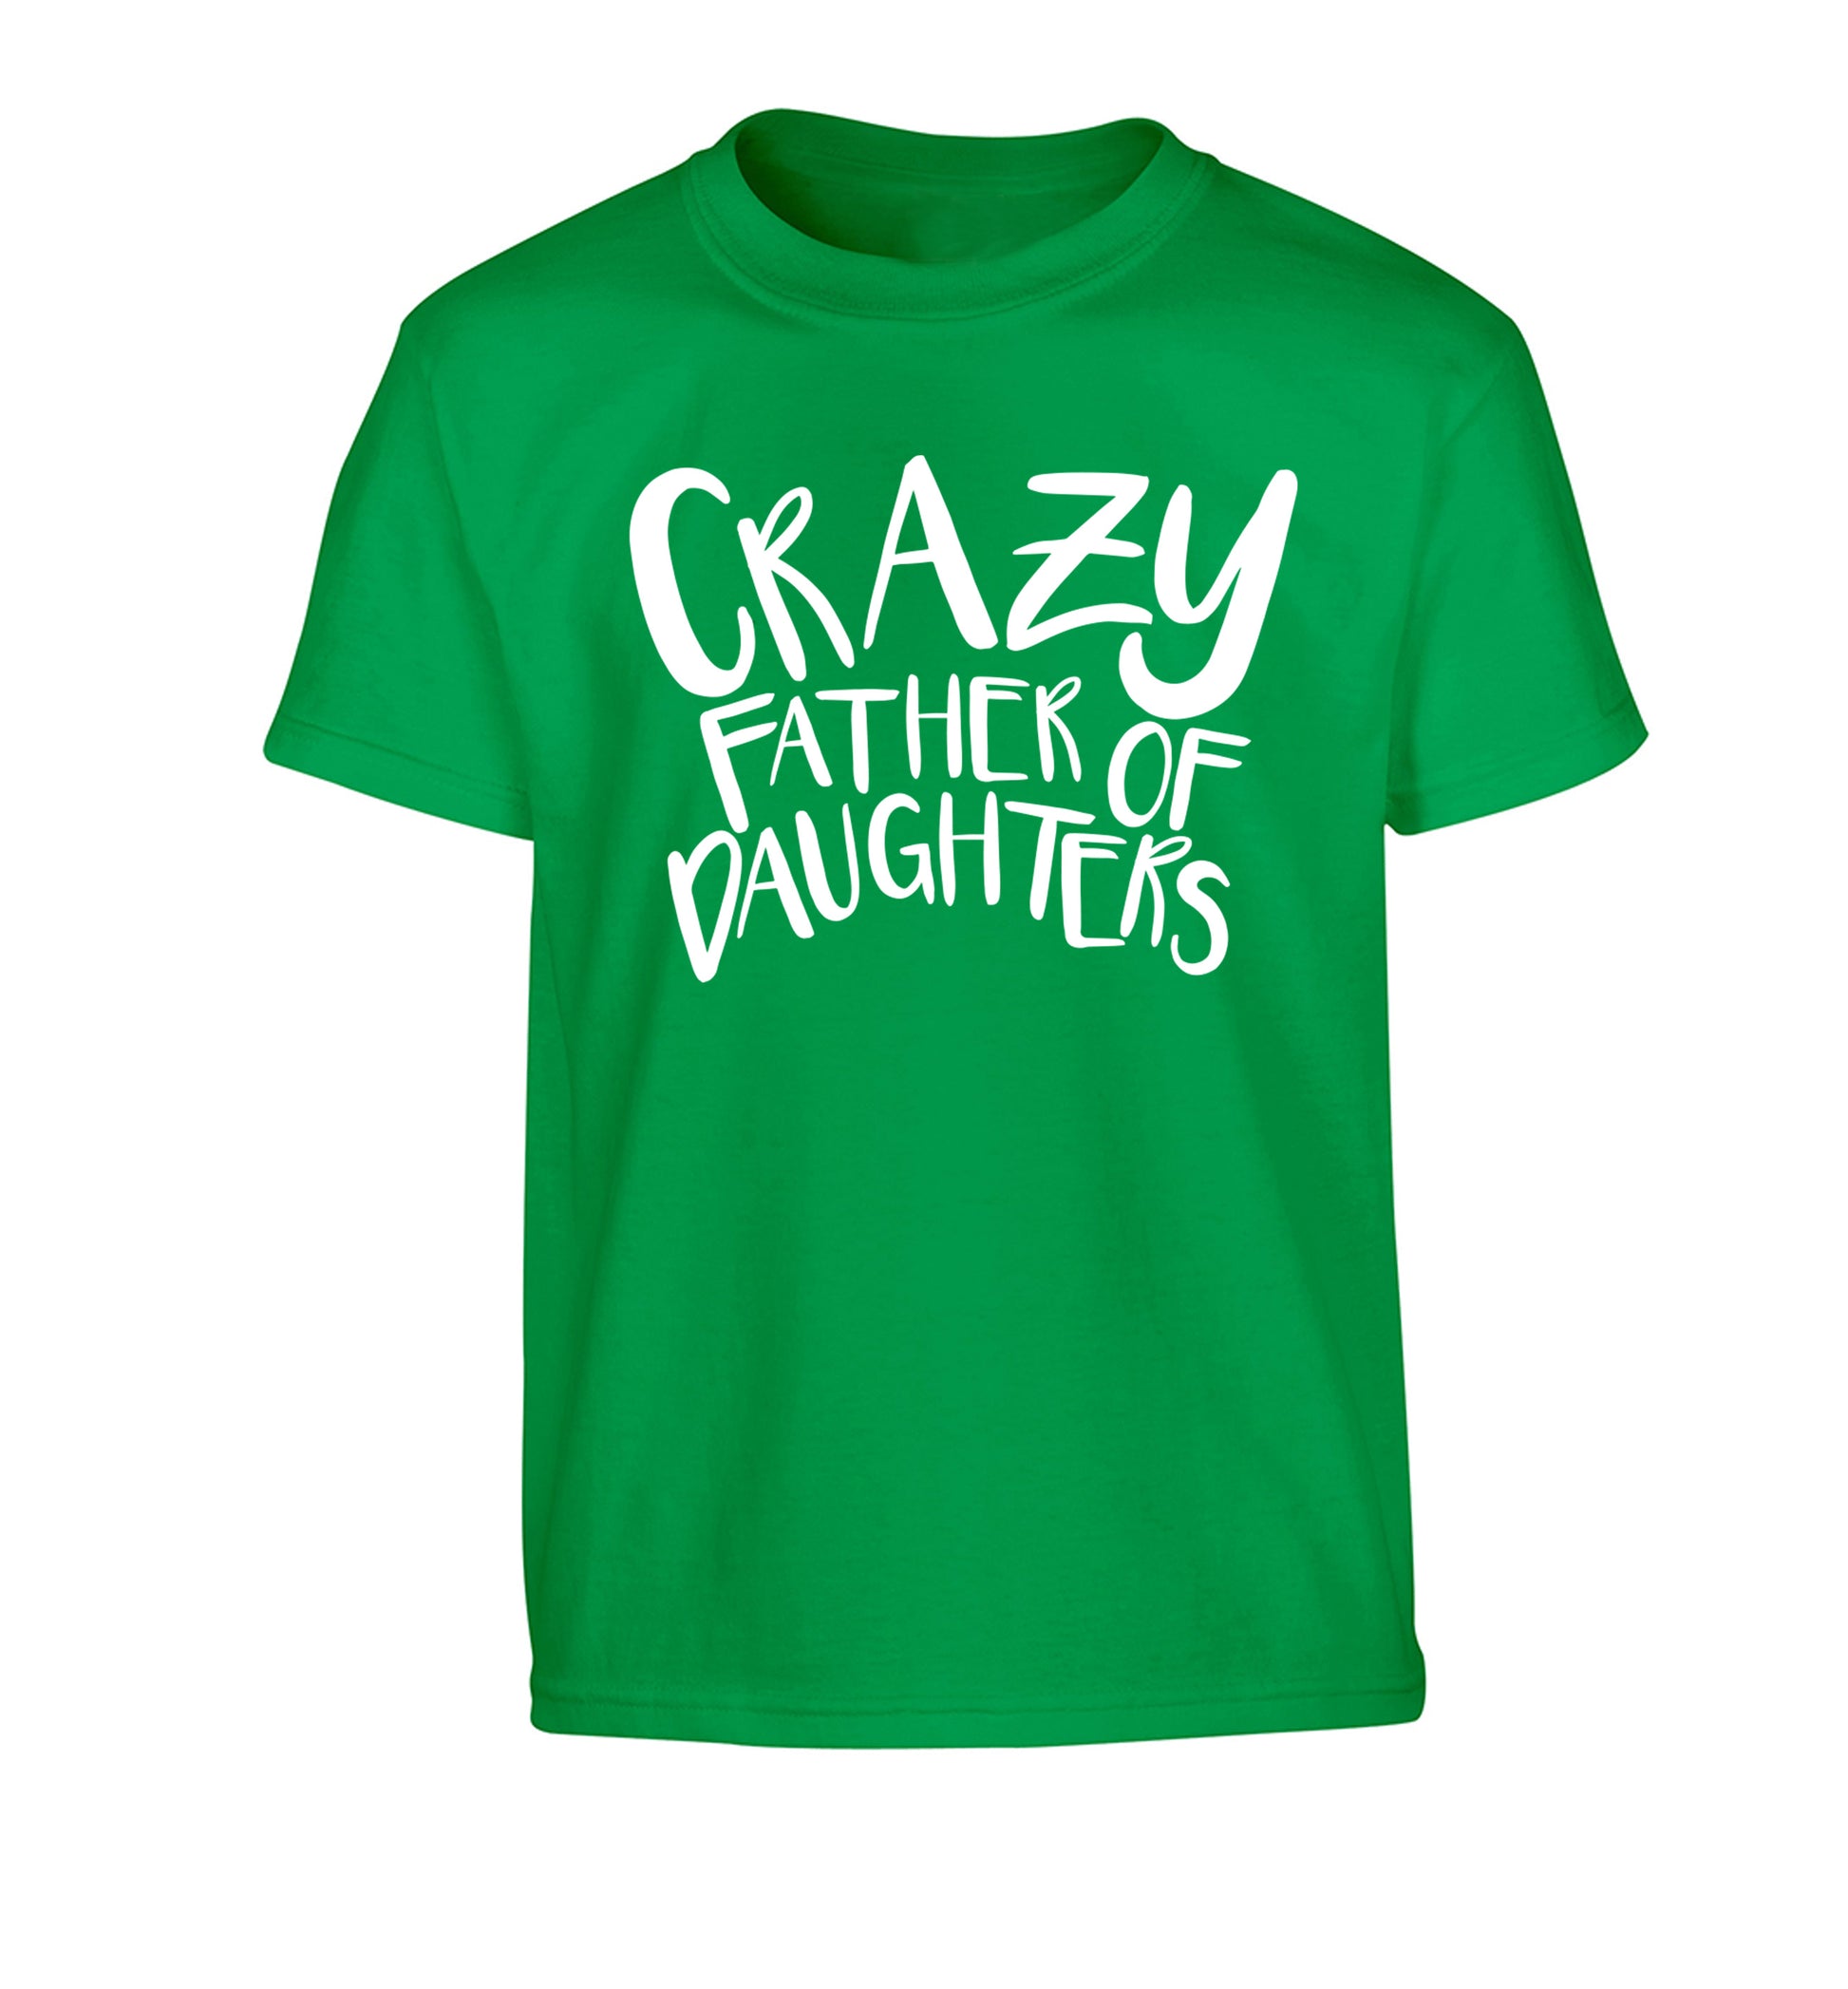 Crazy father of daughters Children's green Tshirt 12-13 Years